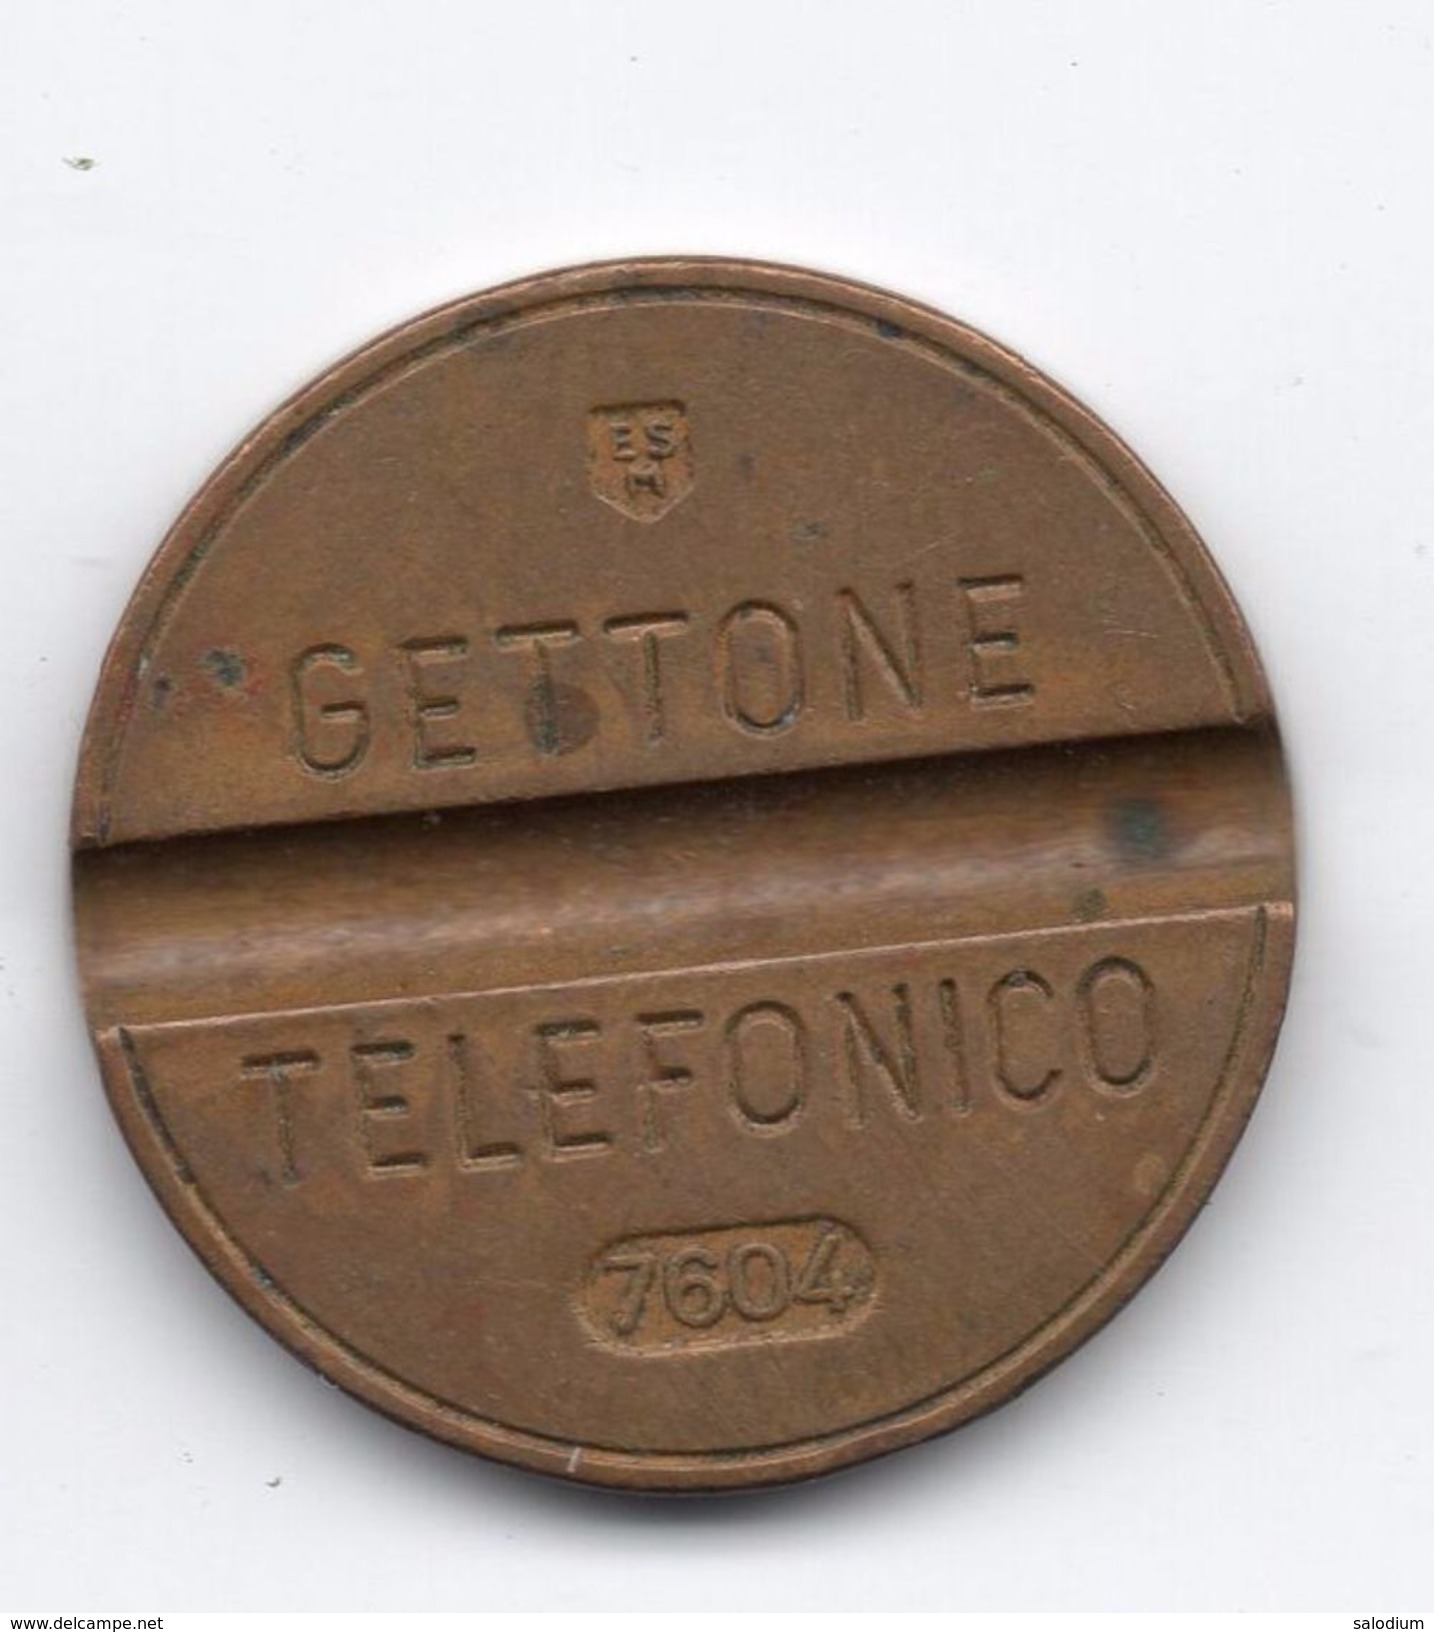 Gettone Telefonico 7604 Token Telephone - (Id-772) - Professionals/Firms